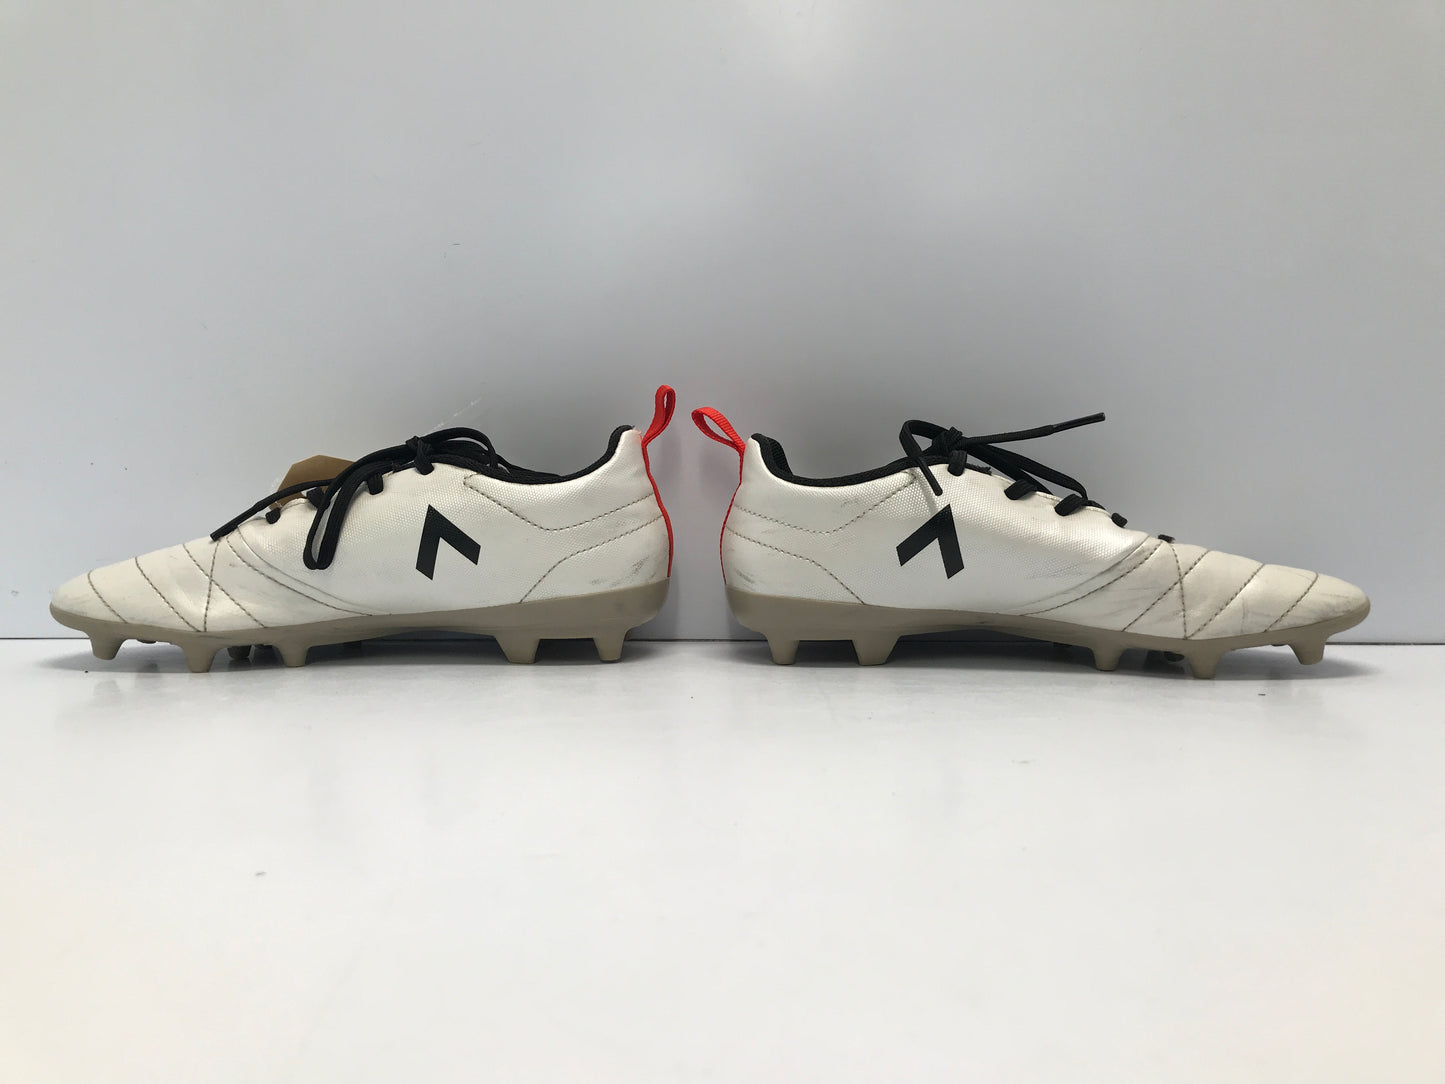 Soccer Shoes Cleats Men's Size 7 Adidas White Black Red Excellent